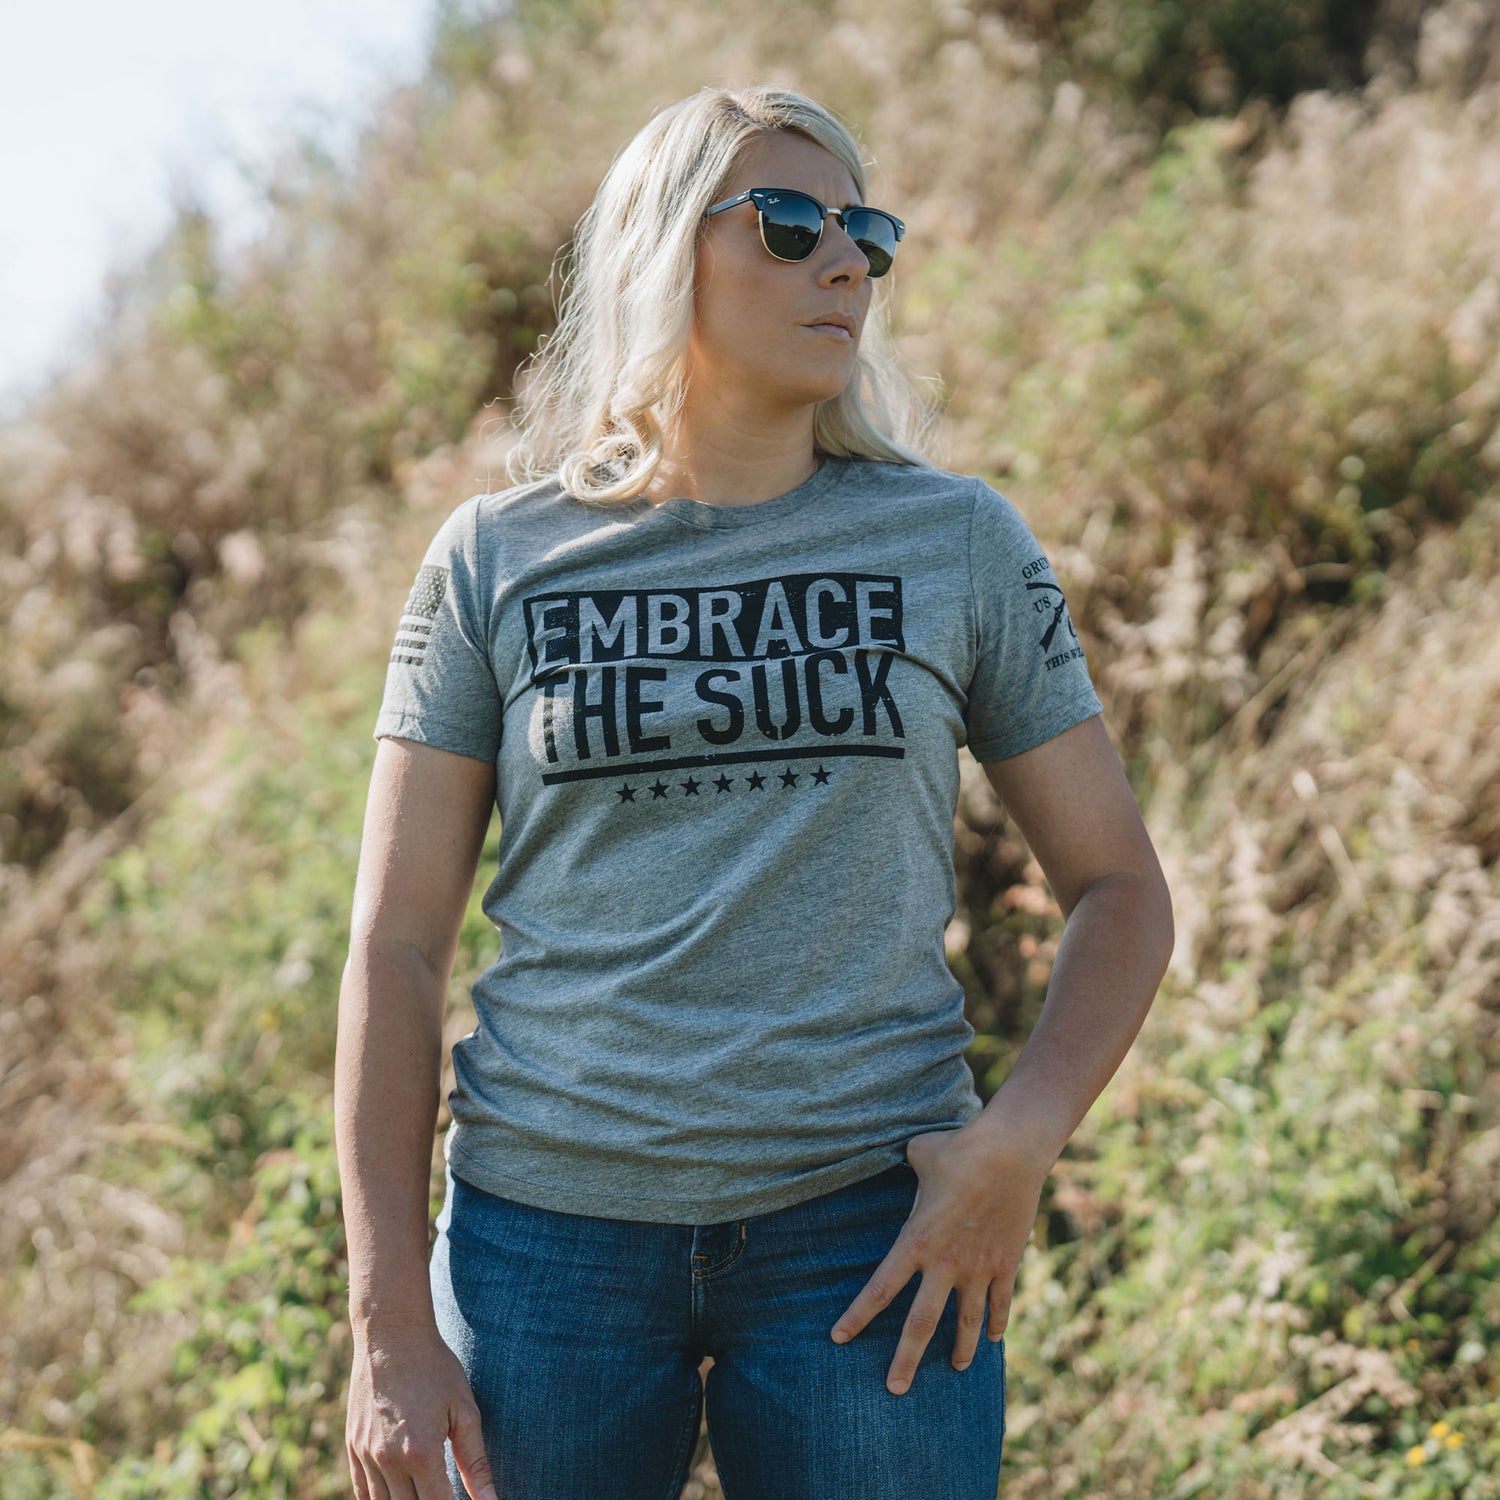 Patriotic Tops for Women - Embrace the Suck 